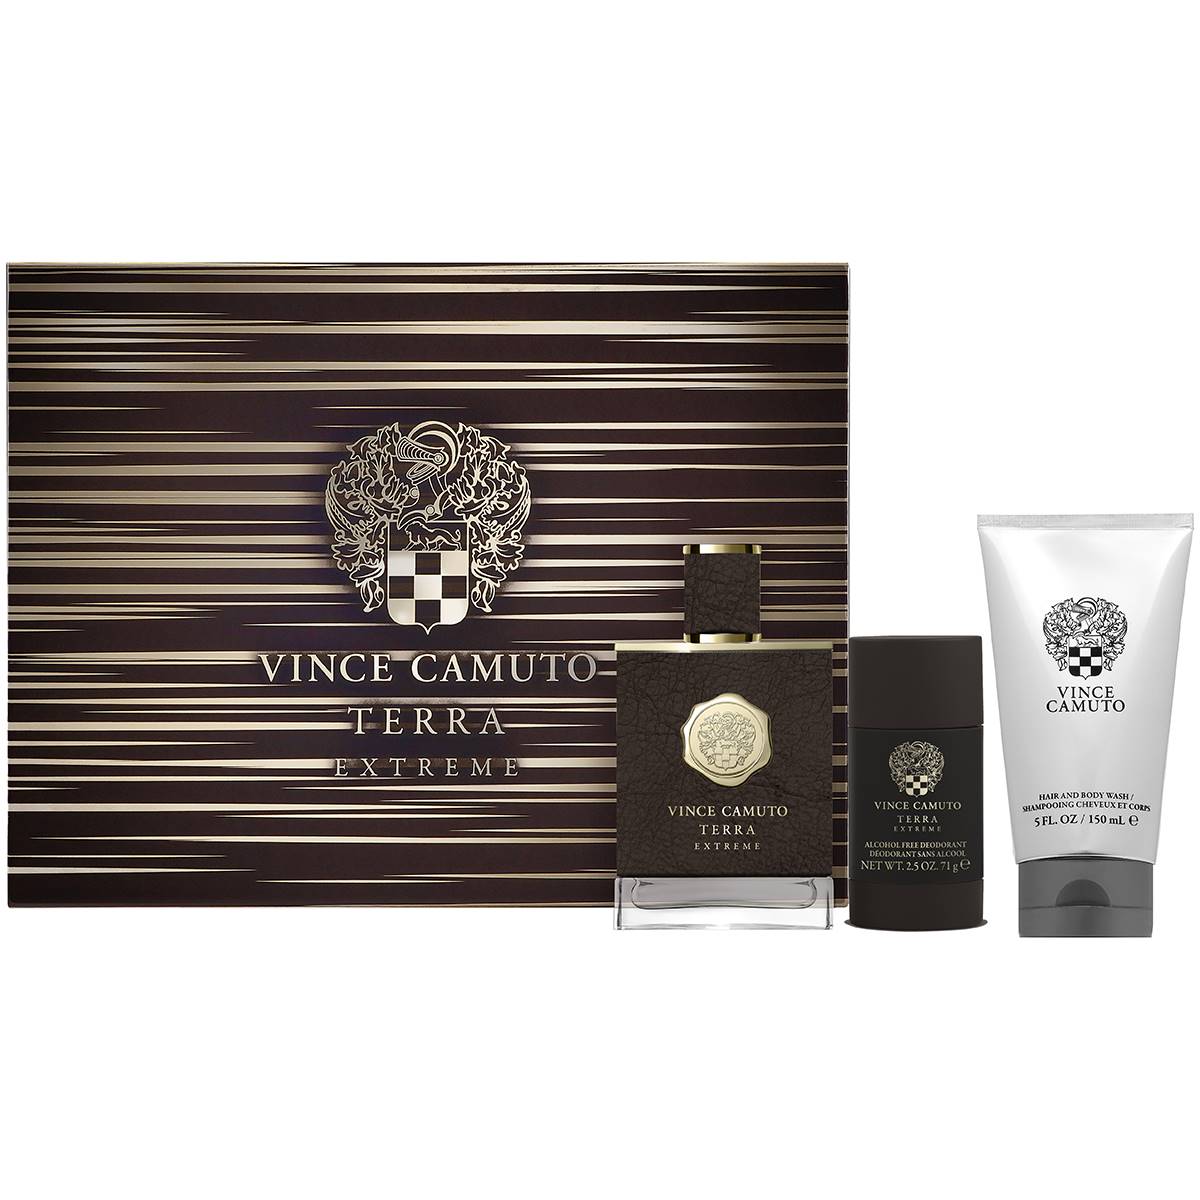 Vince Camuto Terra Extreme 3pc. Gift Set - Value $145.00